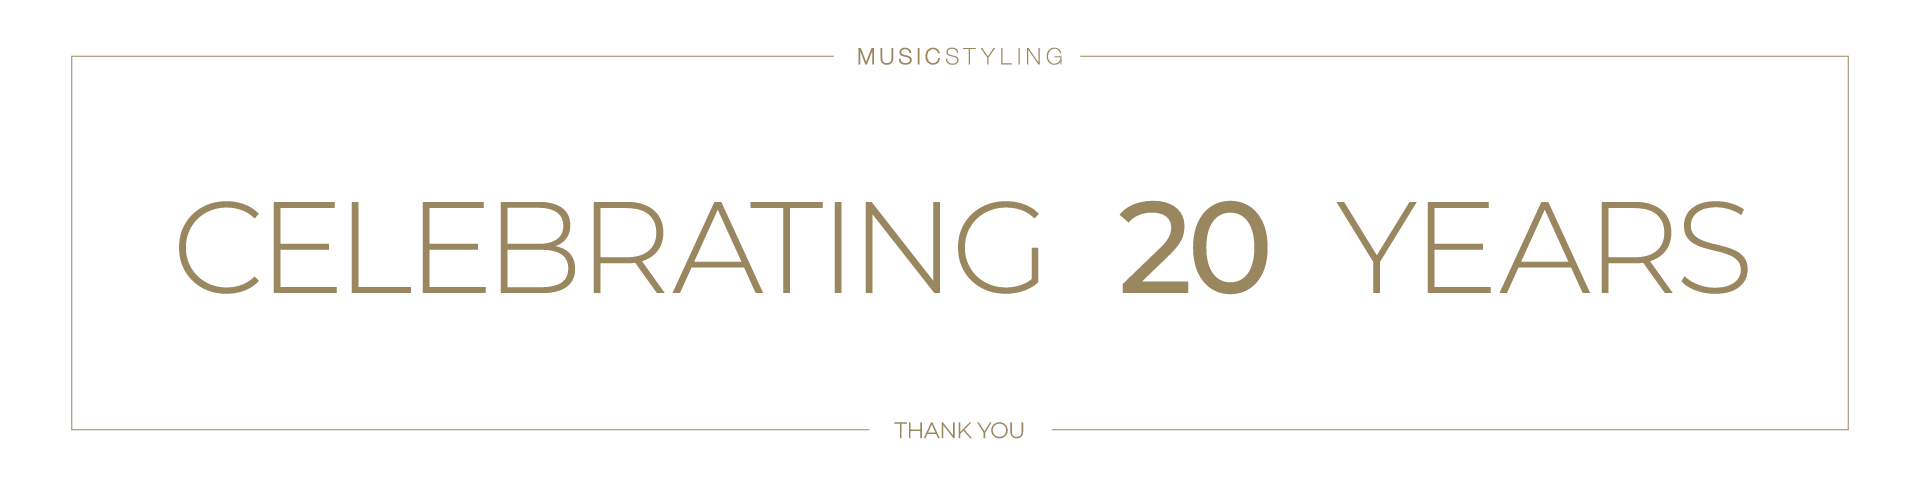 Celebrating 20 years of Musicstyling. Thank you.